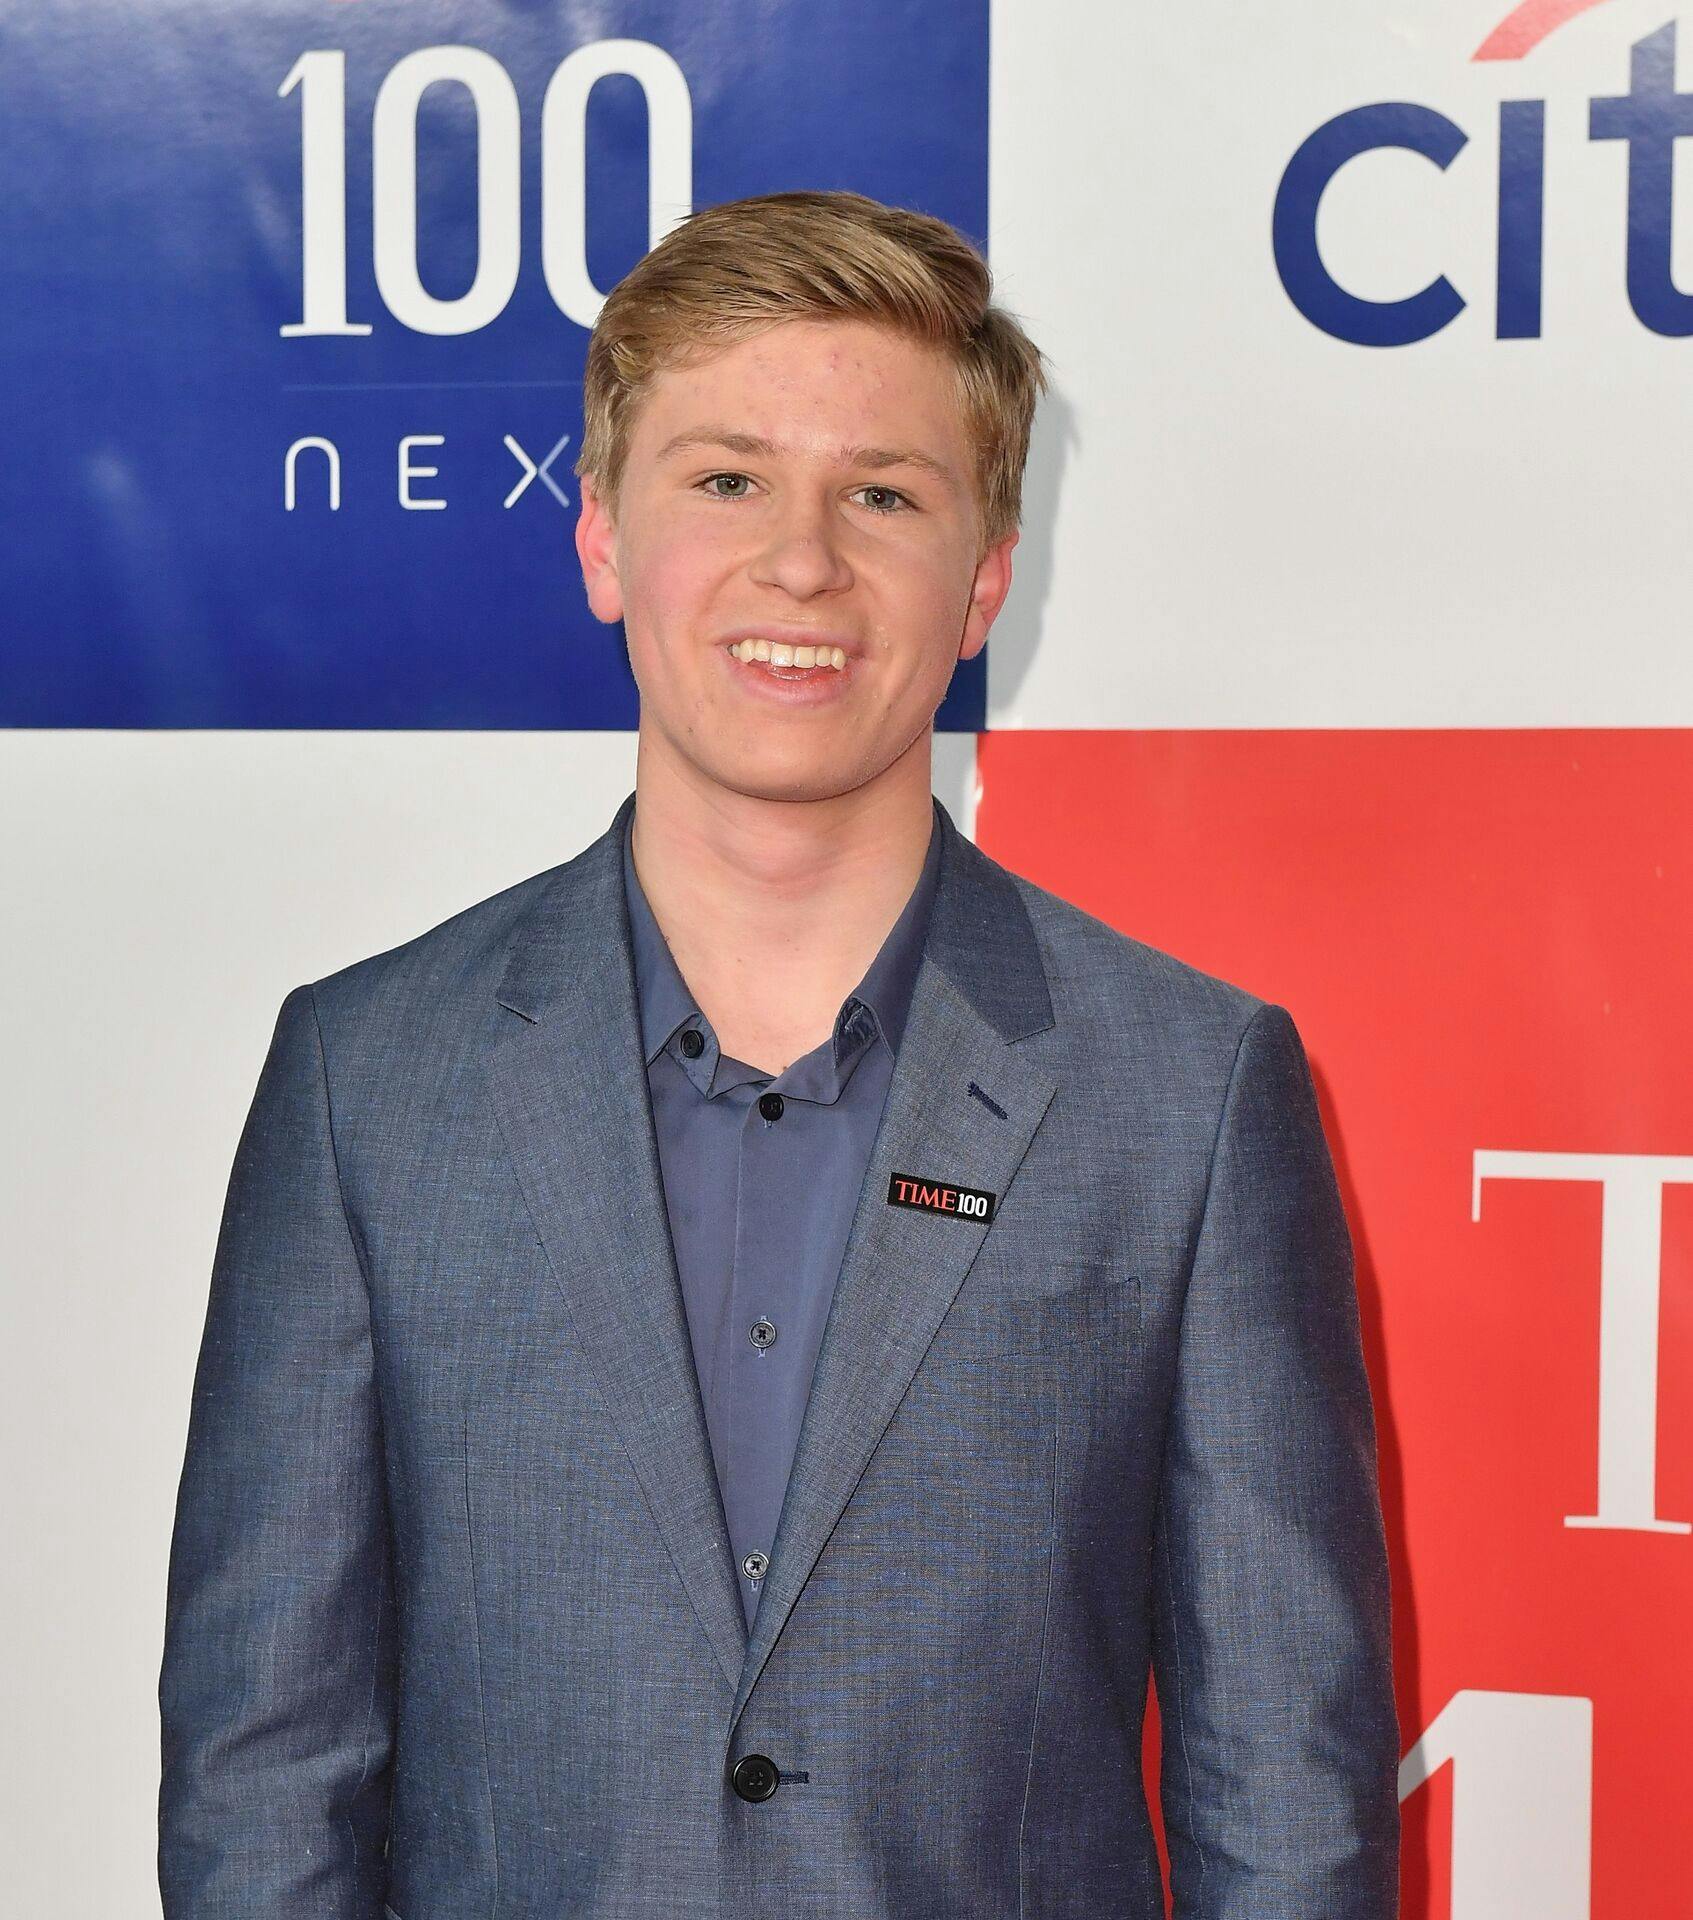 Australian wildlife TV personality Robert Irwin attends the First Annual "Time 100 Next" gala at Pier 17 on November 14, 2019 in New York City. (Photo by Angela Weiss / AFP)